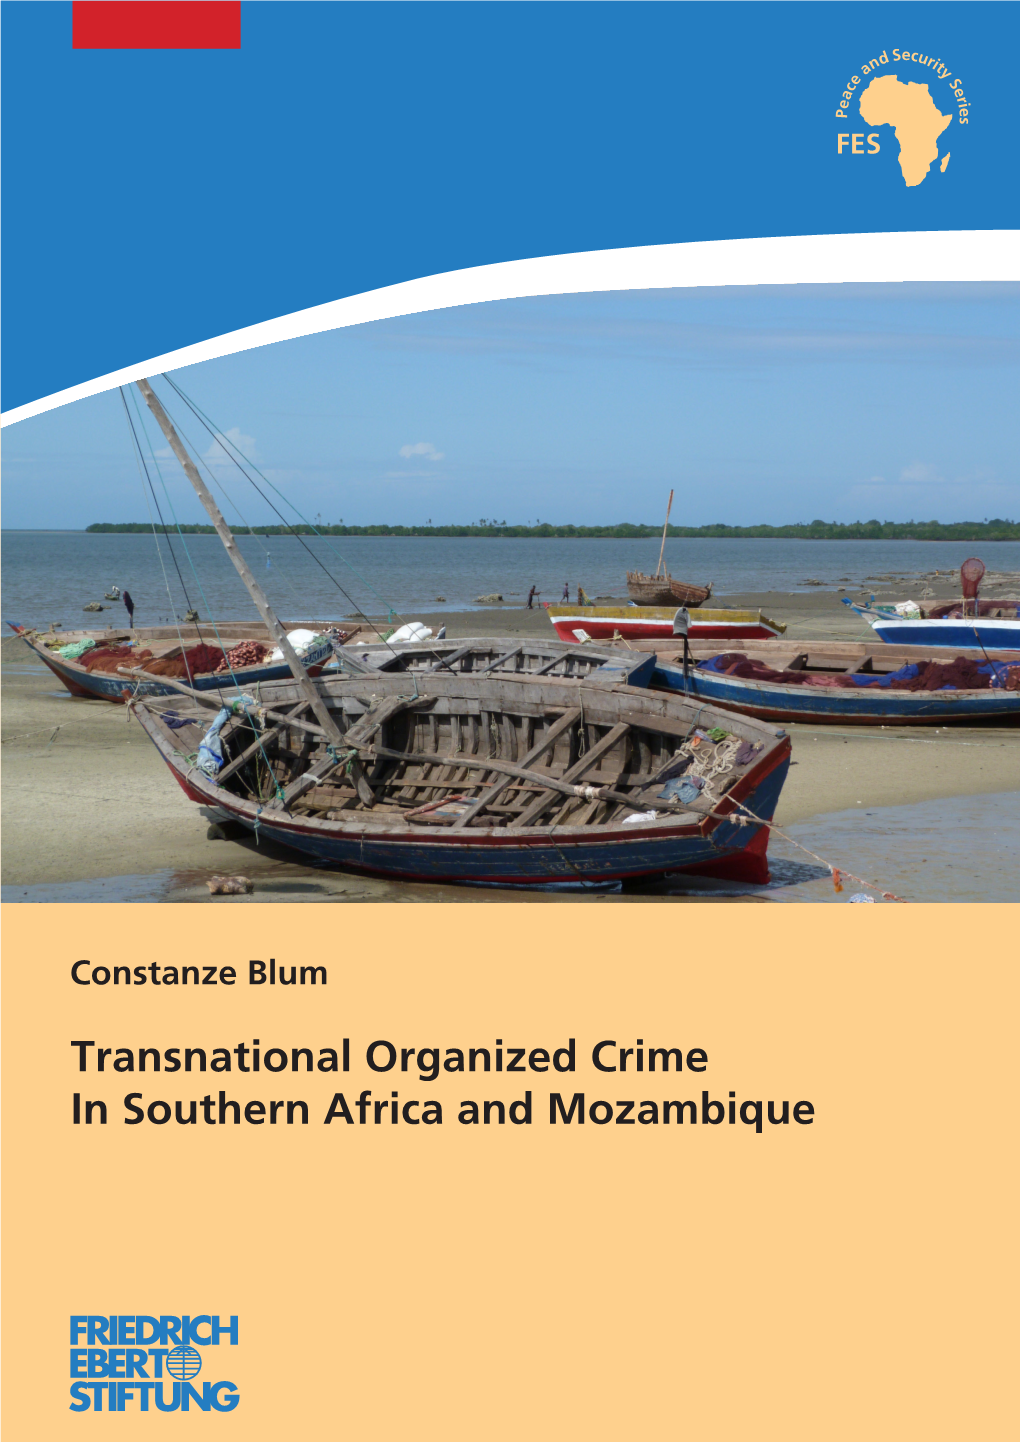 Transnational Organized Crime in Southern Africa and Mozambique CONTENTS